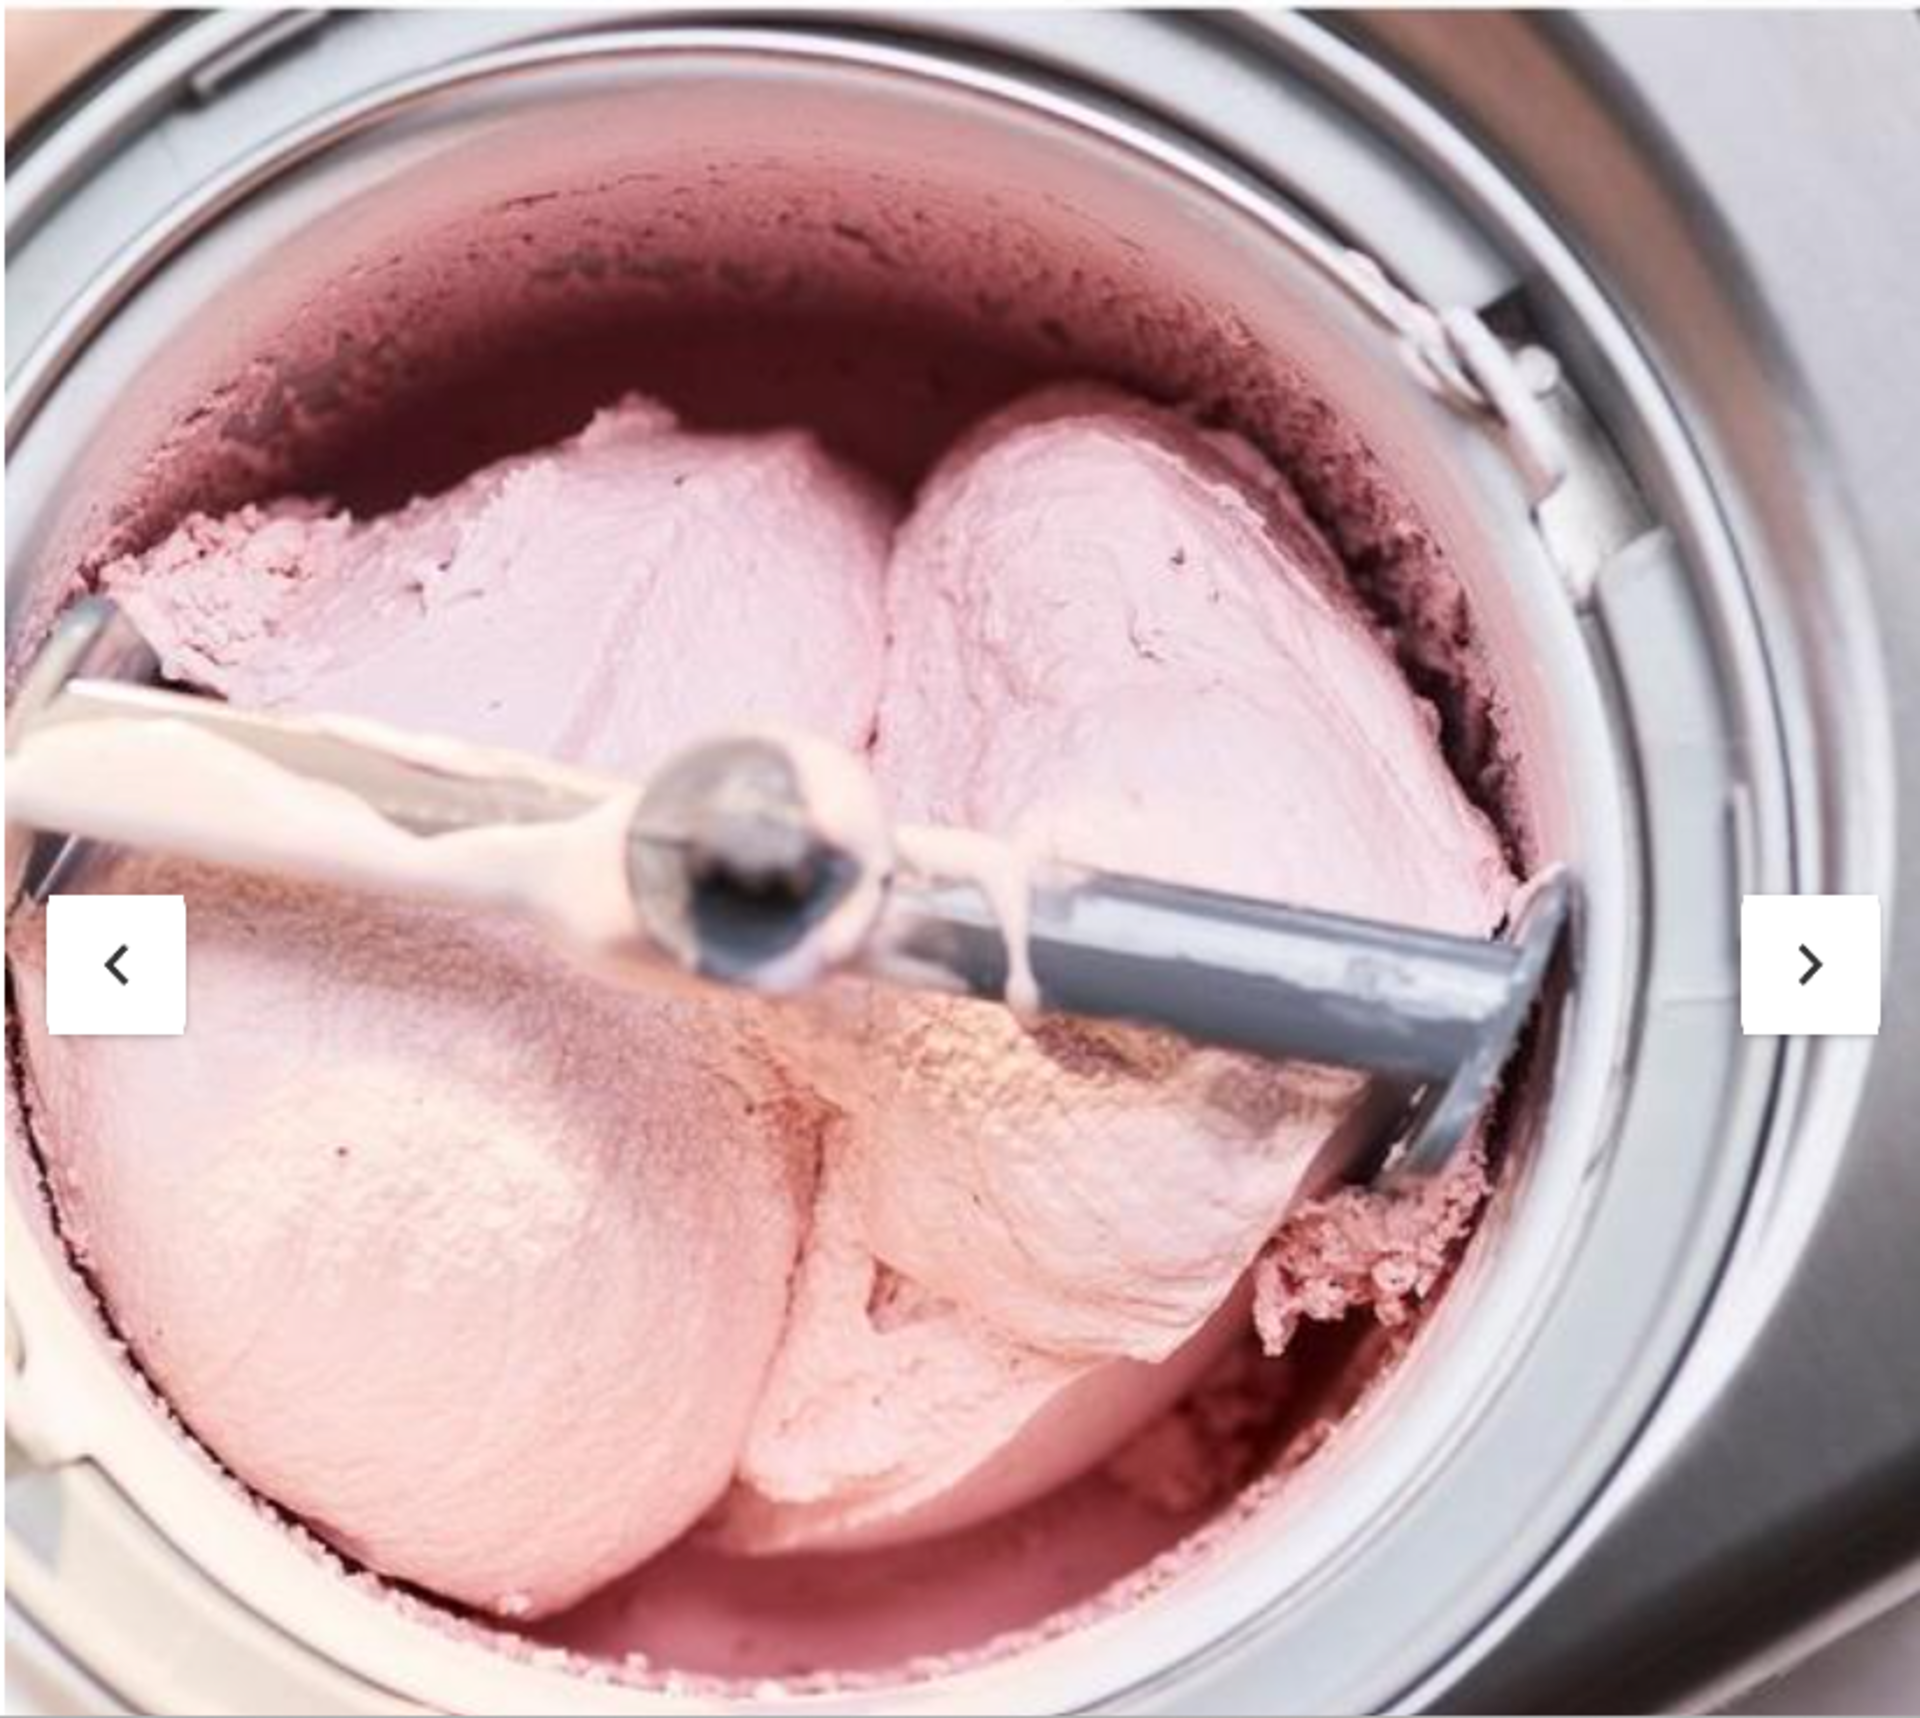 Cuisinart Gelato & Ice Cream Professional. RRP £299.99. - SR4. The machine comes with 2 specialist - Image 2 of 2